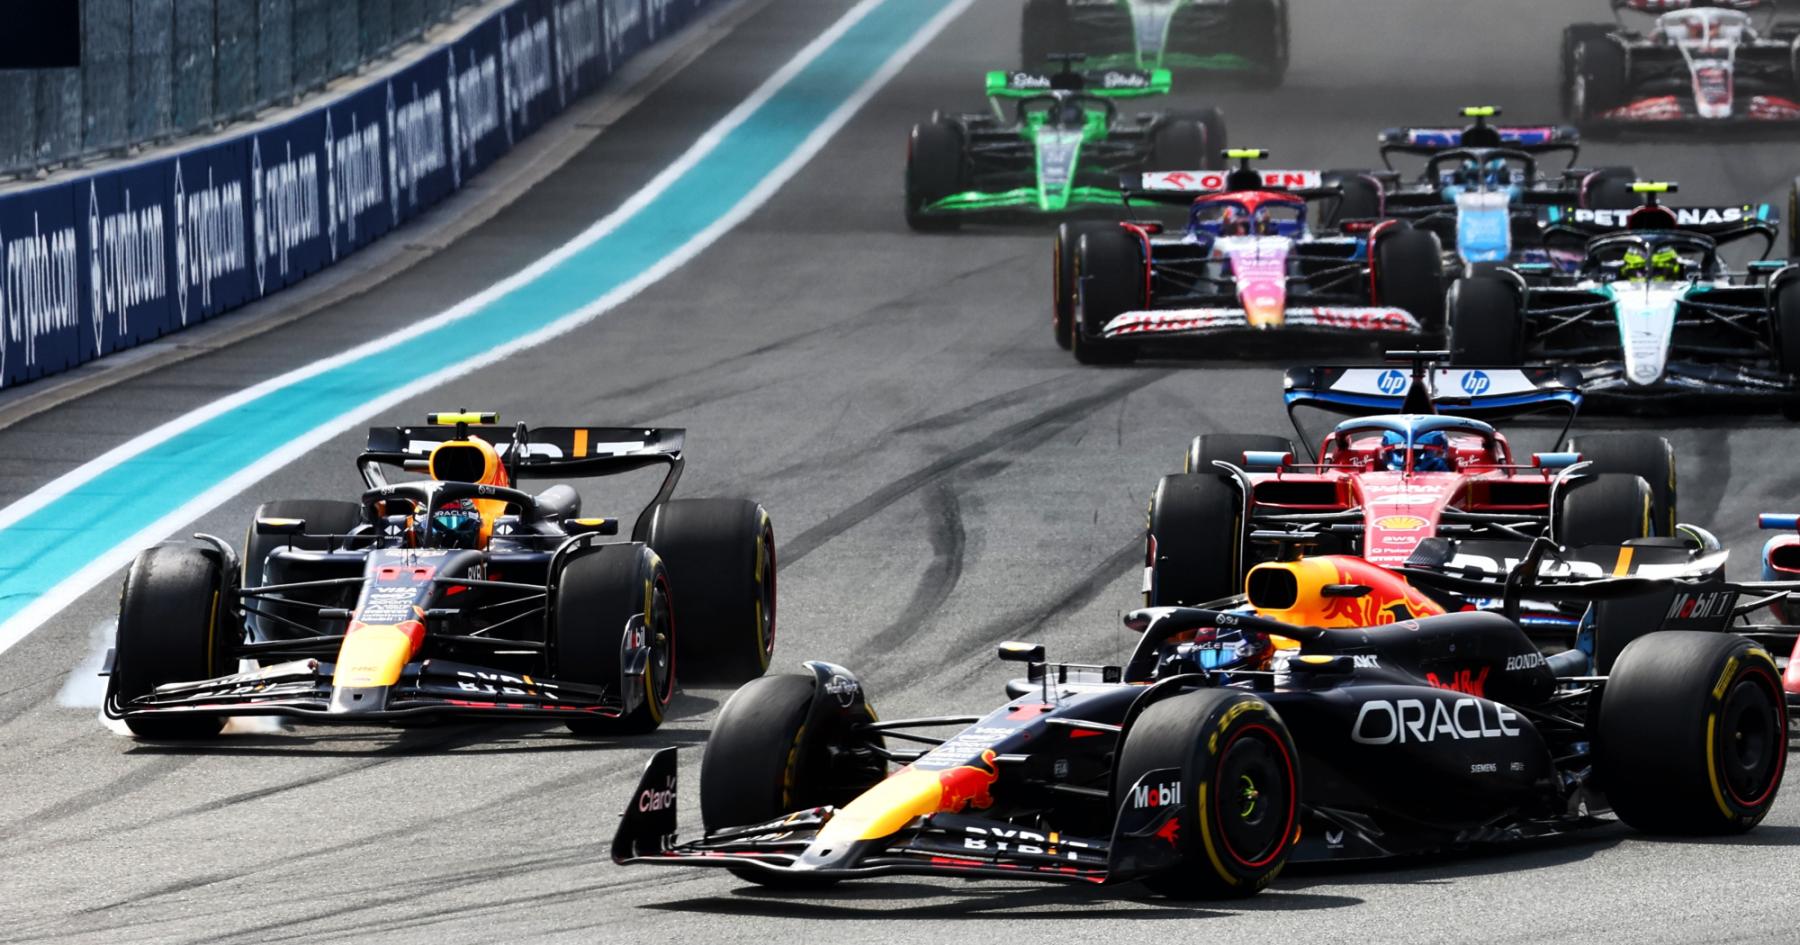 The Perez Phenomenon: On the Cusp of Greatness After Verstappen Near-Miss